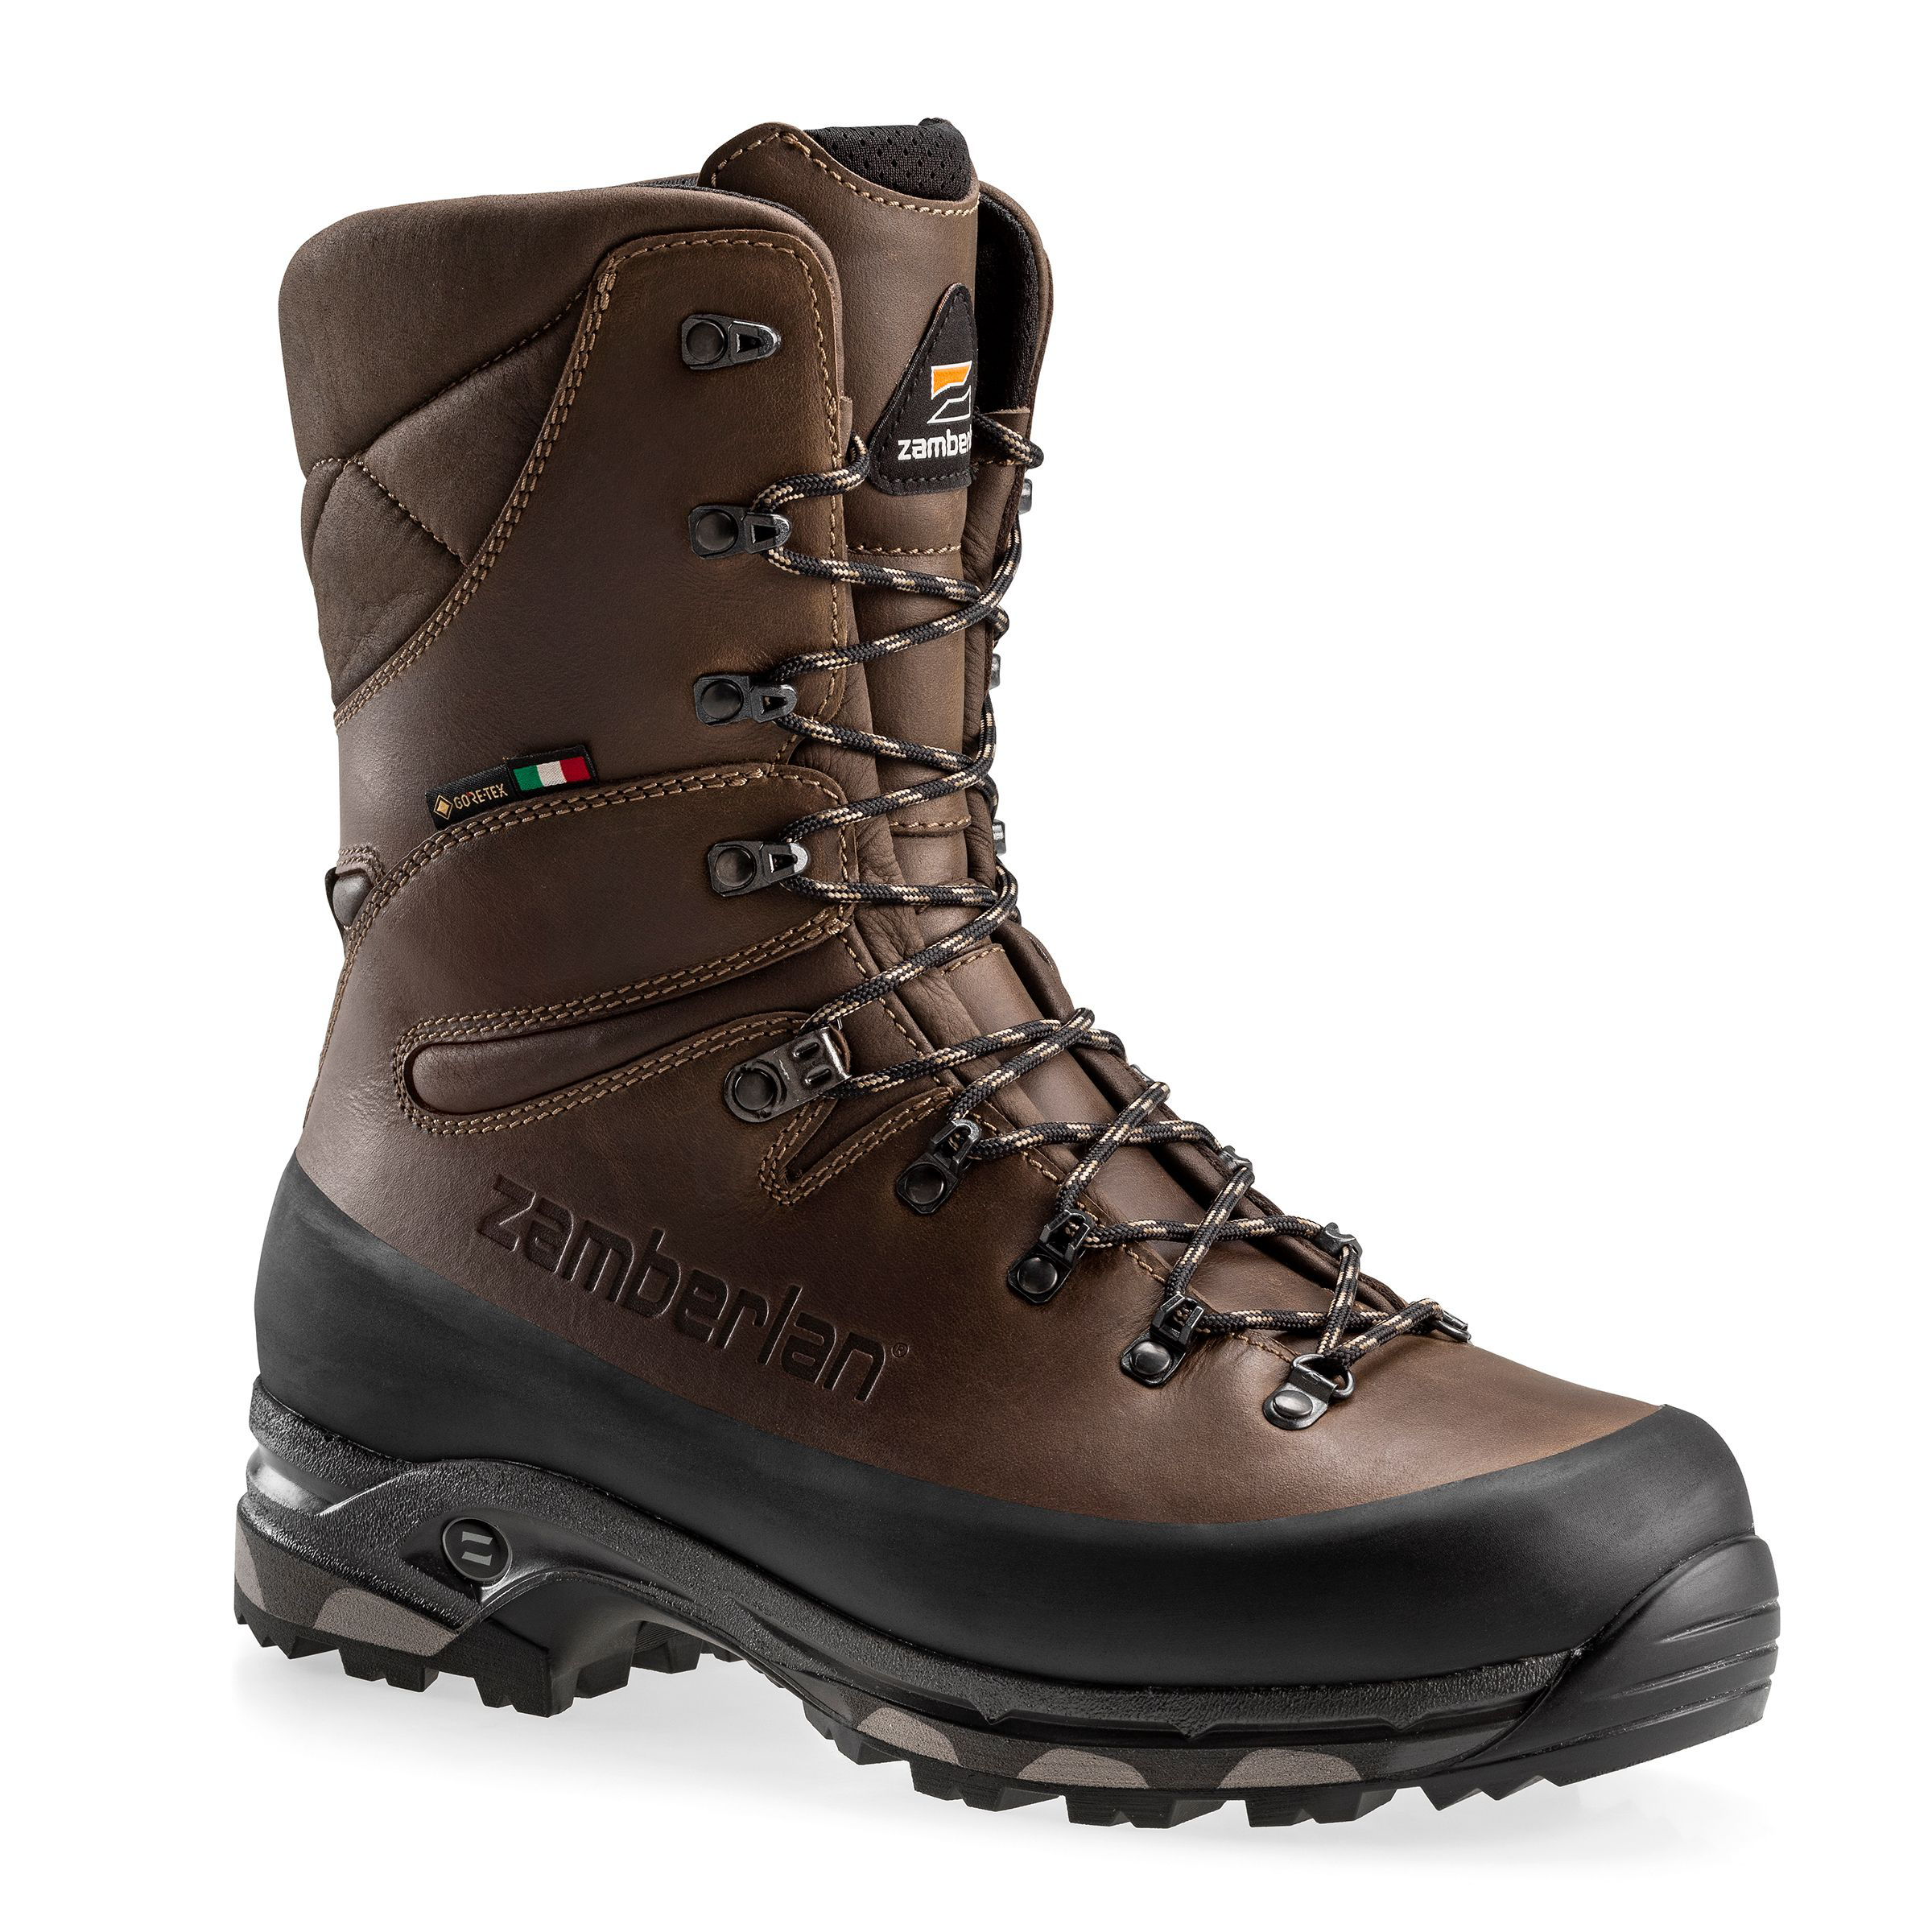 Zamberlan 1005 Hunter Pro GTX RR WL GORE-TEX Insulated Hunting Boots for Men - Brown - 9.5W